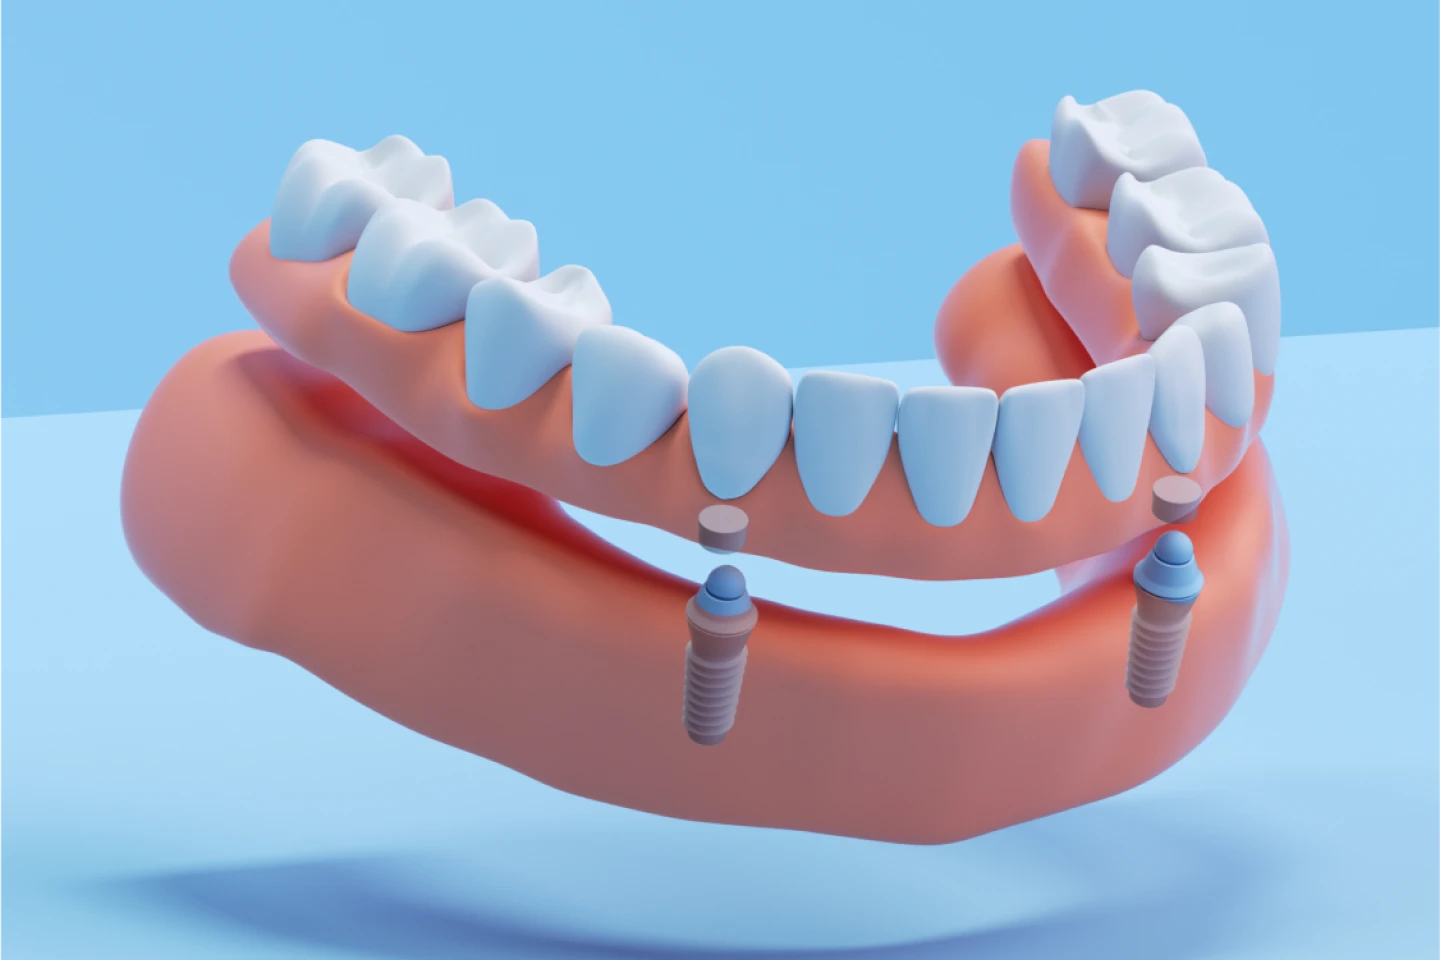 An illustration of Implant dentures. The implant dentures are removeable premium snap-in denture, with the secure fit of permanent titanium implants, designed for a comfortable, stable fit with no adhesives.